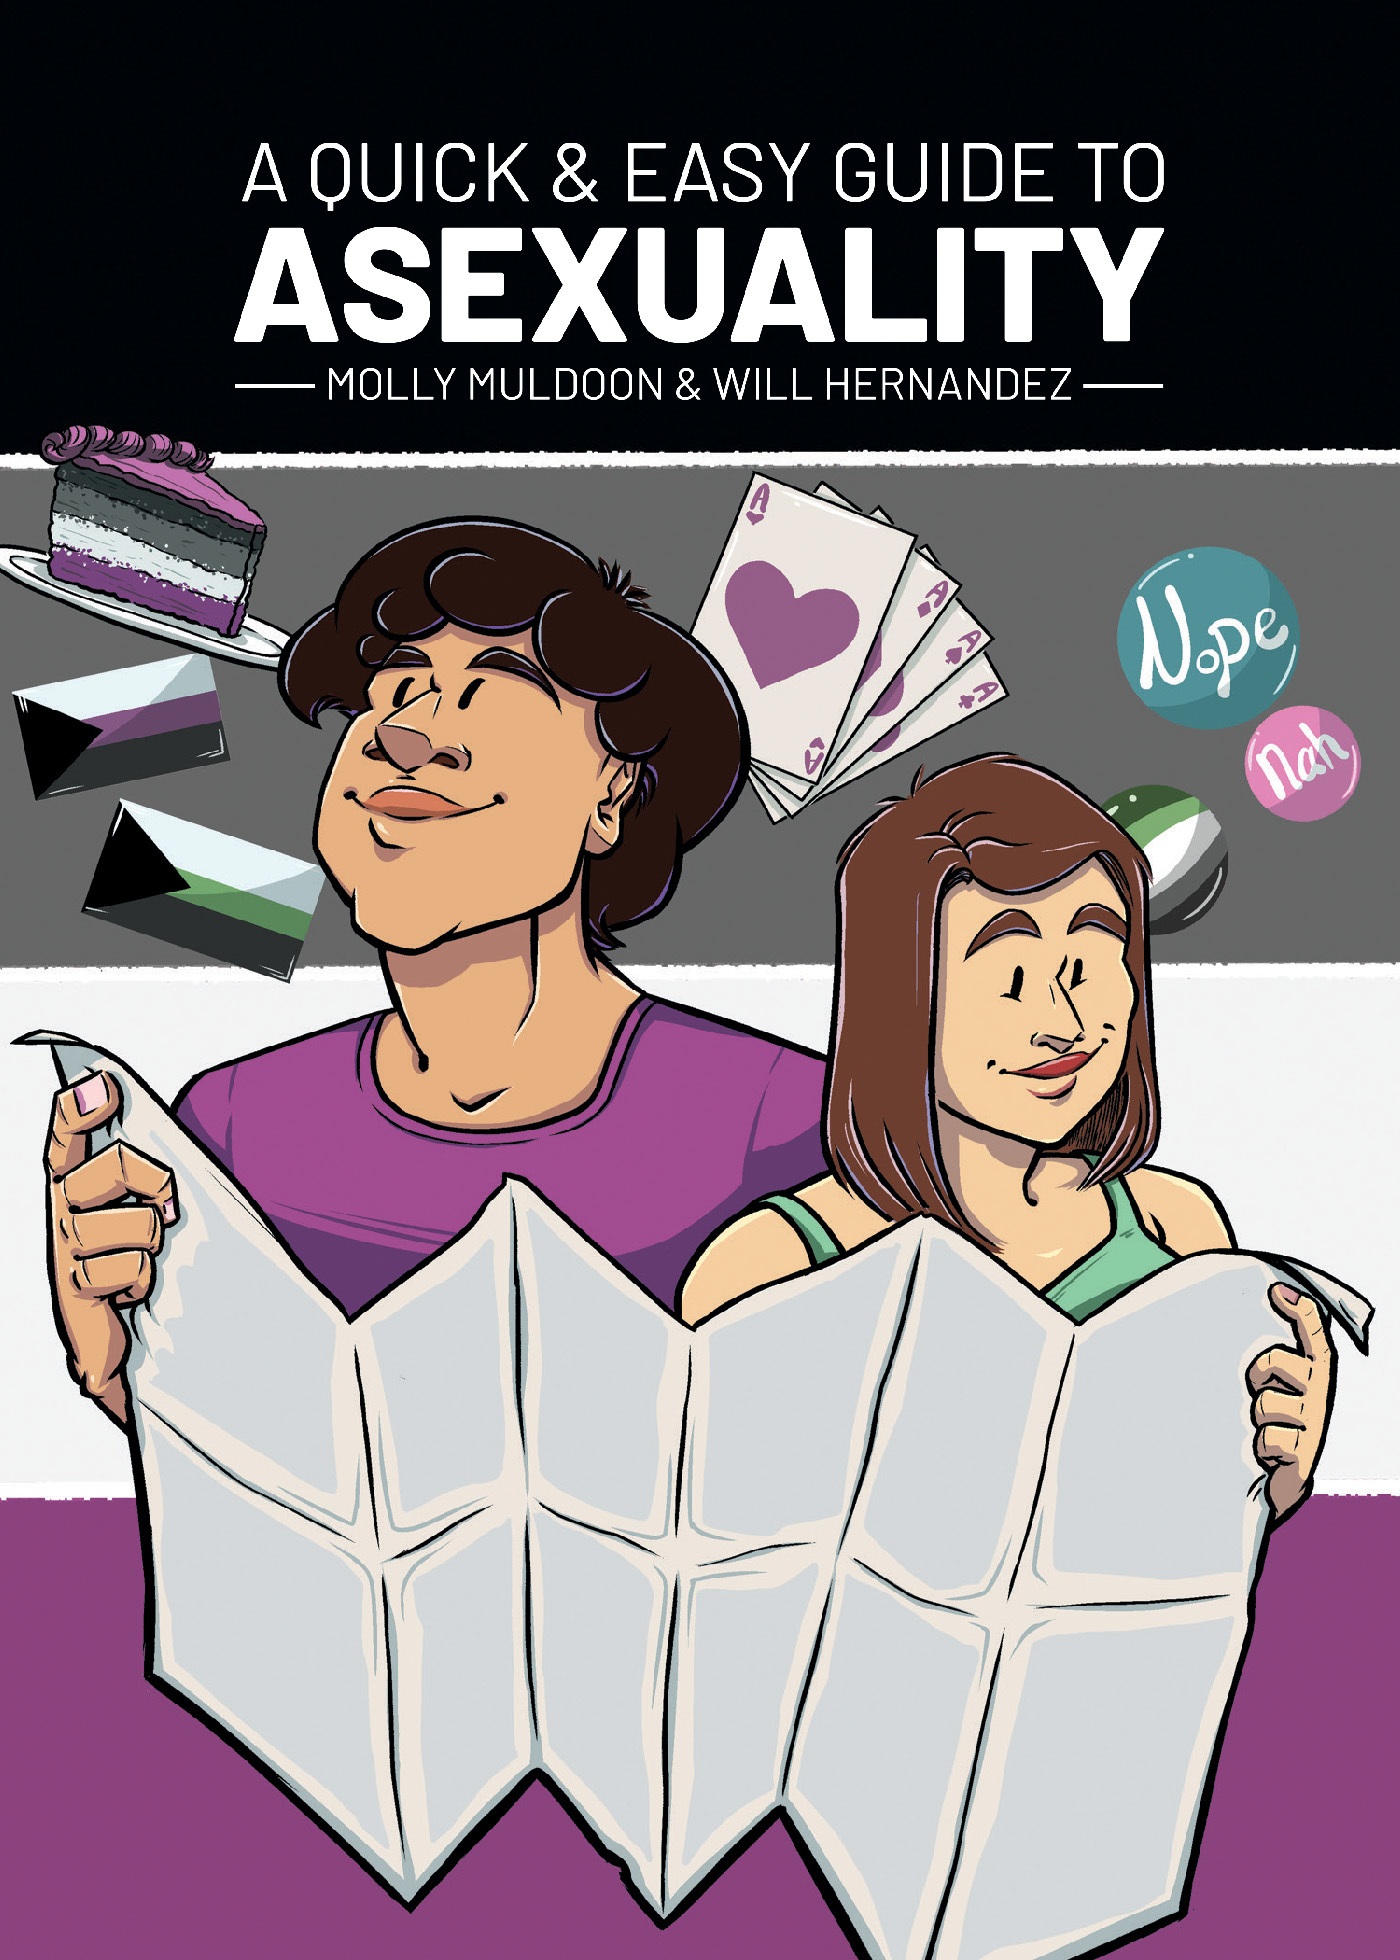 A QUICK & EASY GUIDE TO ASEXUALITY Interview with  Molly Muldoon & Will Hernandez